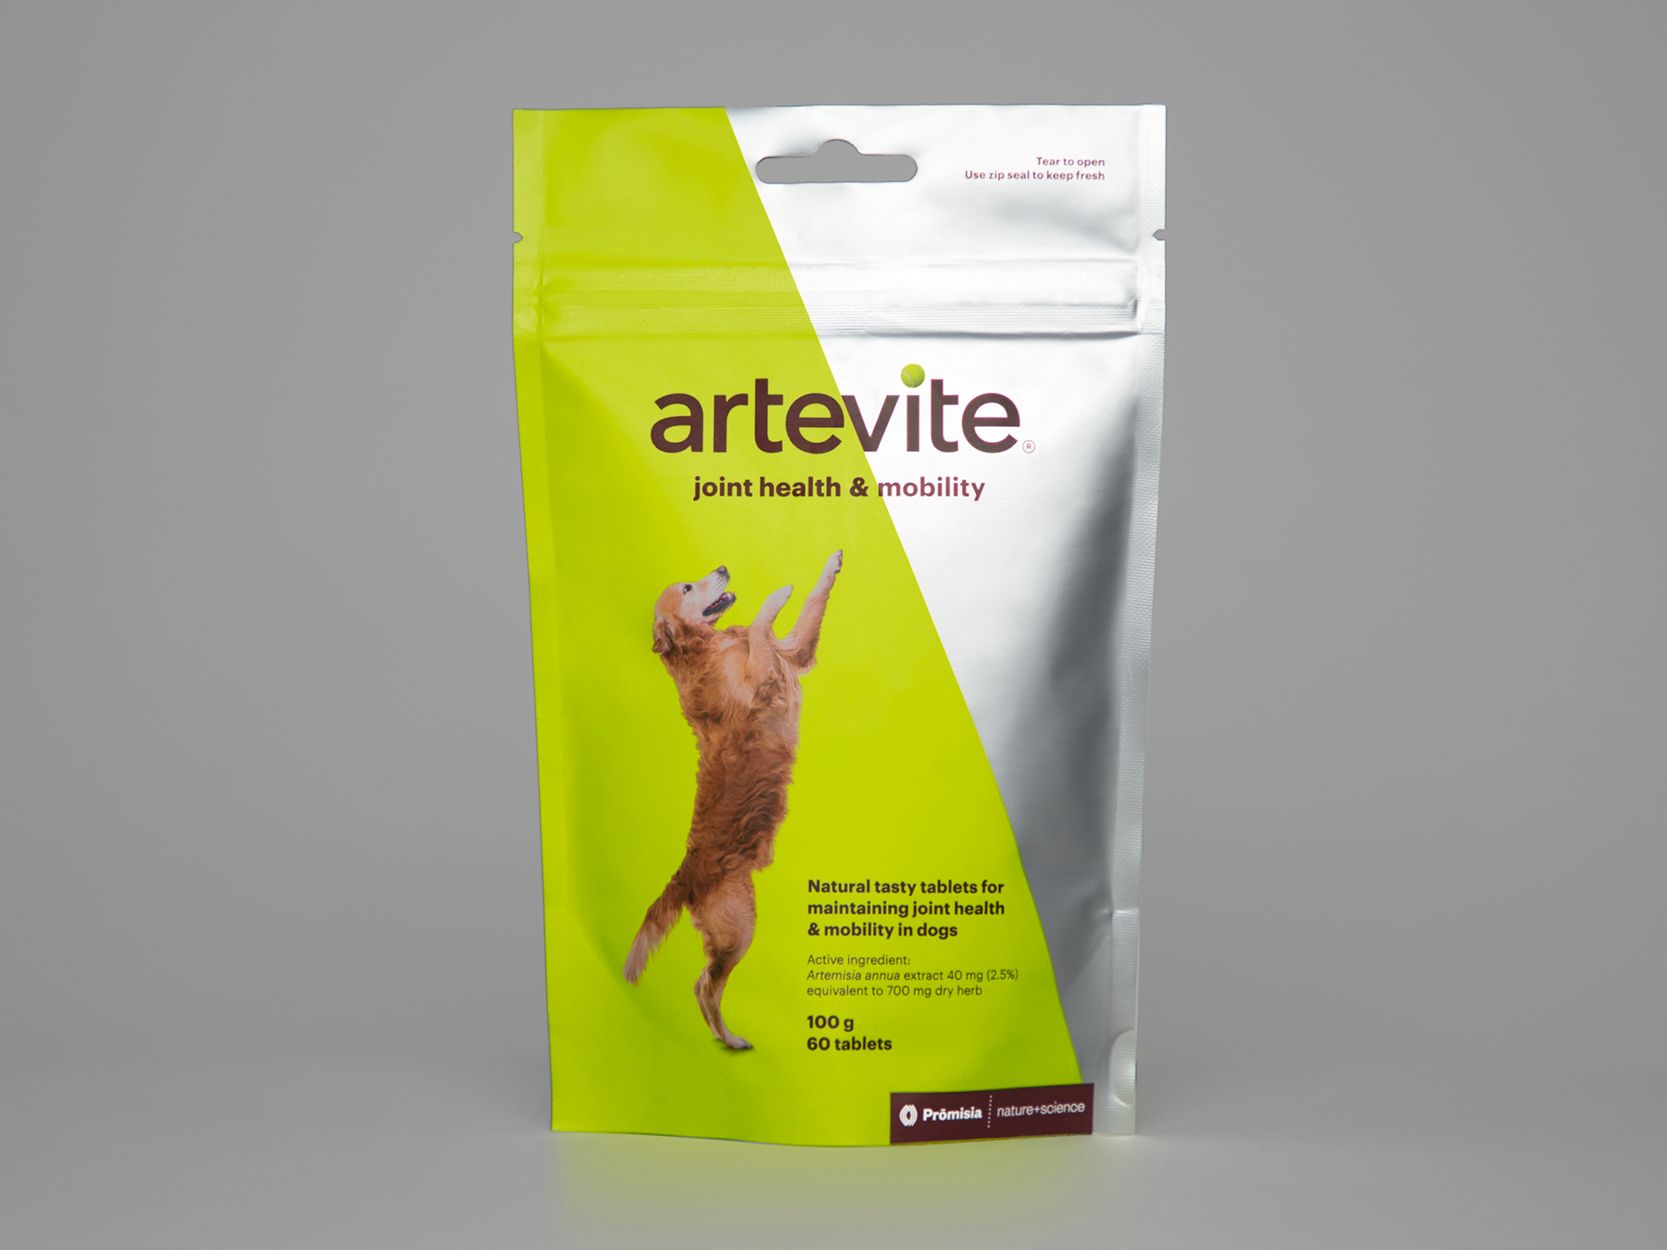 The front of the Artevite dog tablet packaging